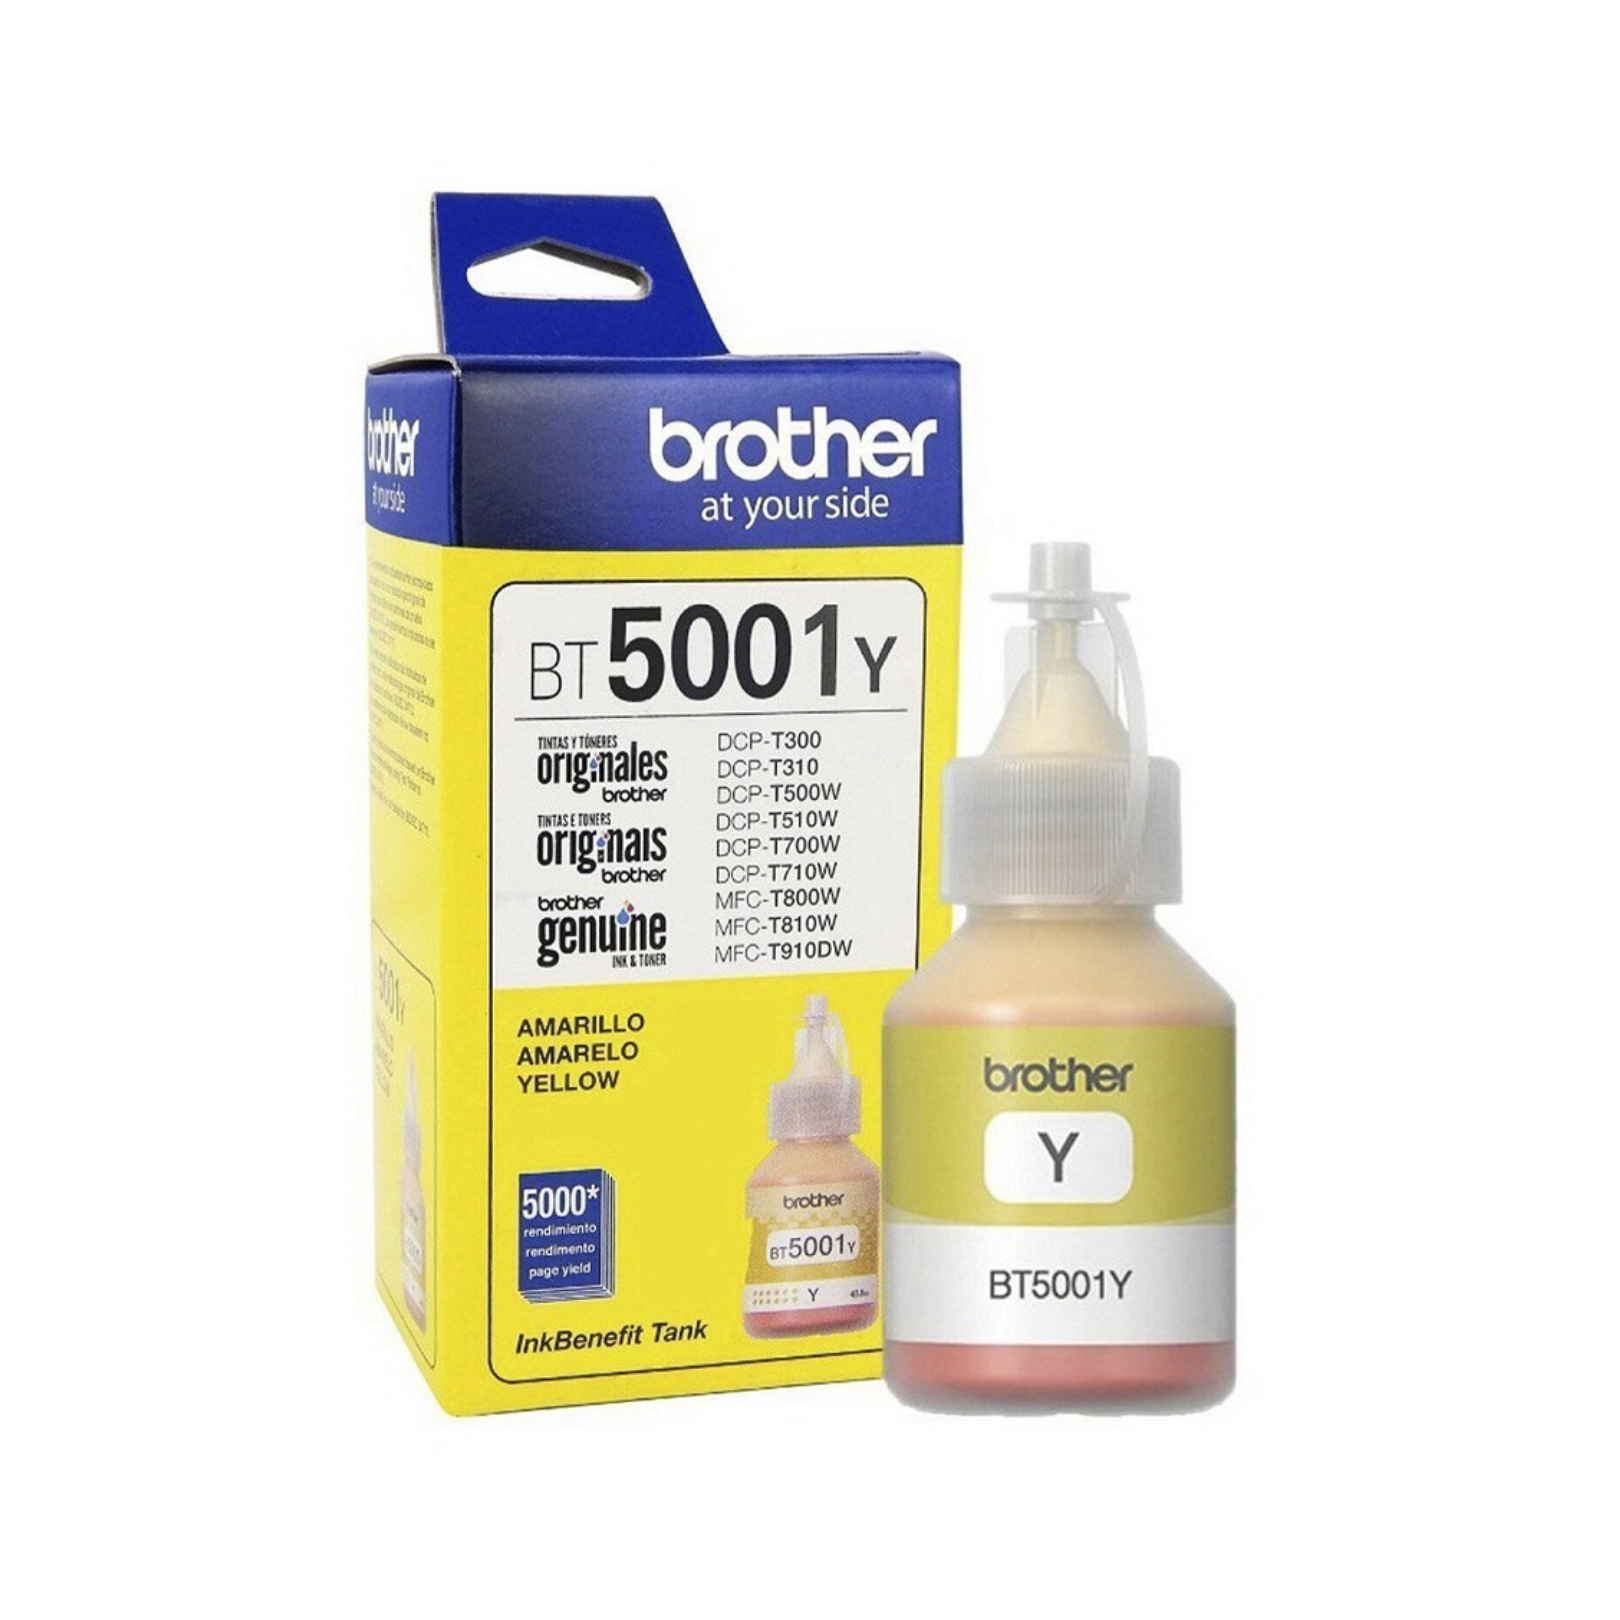 Botella de Tinta BROTHER BT5001Y Yellow DCP-T300/T500W/T700W/T800W